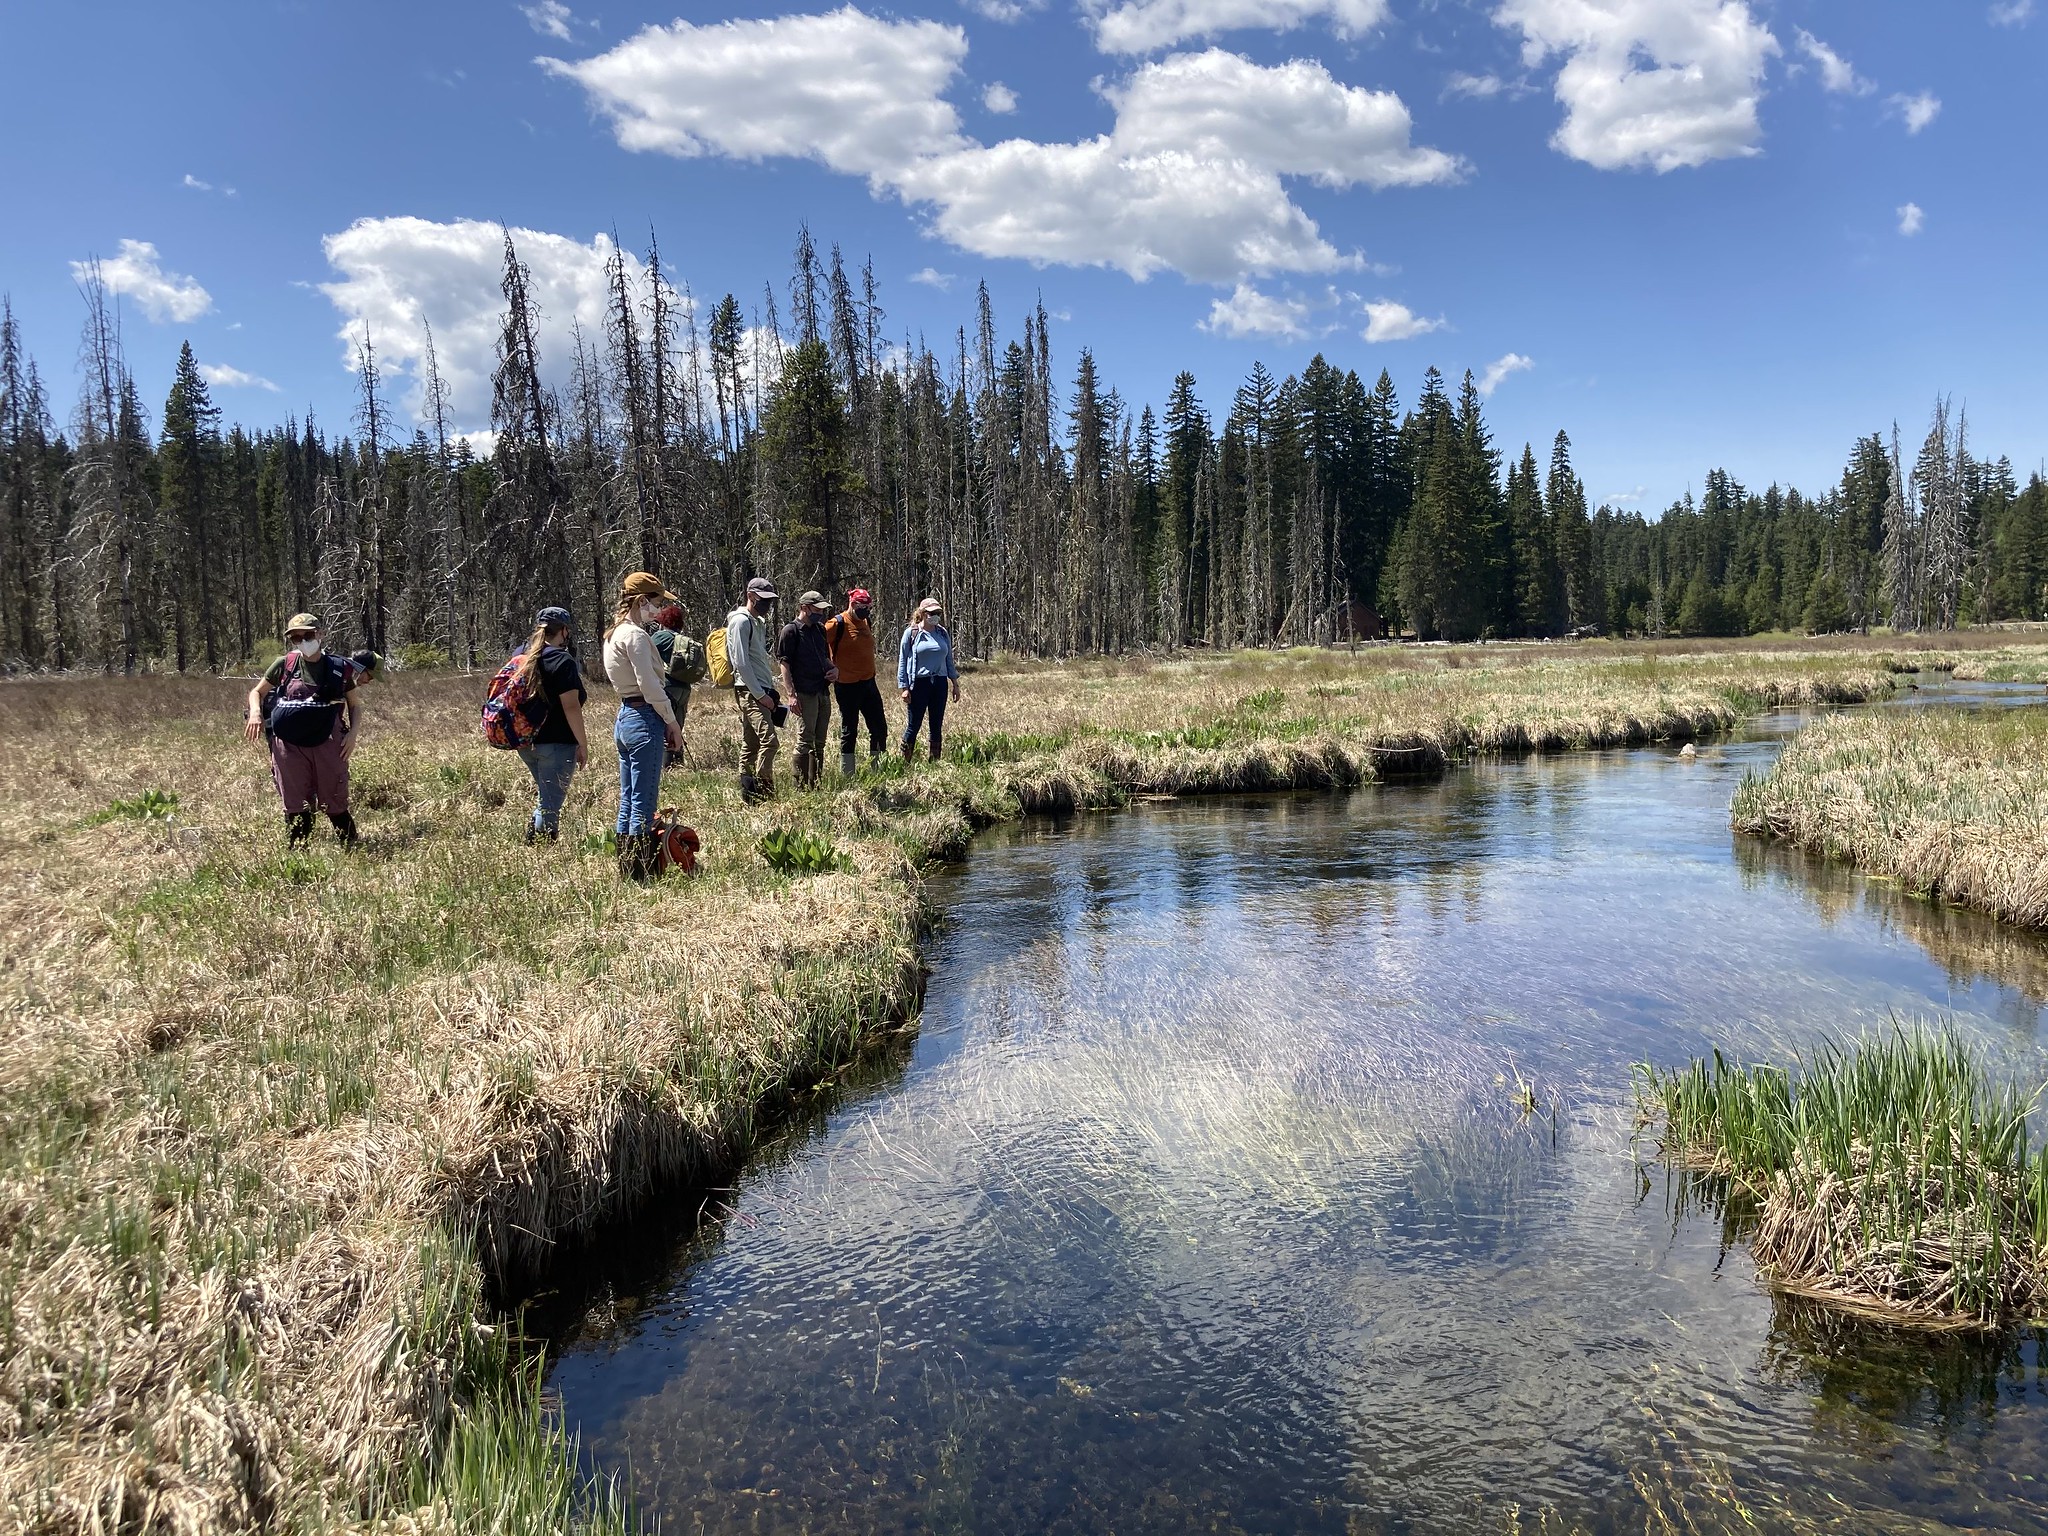 Image shows an open wetland area surrounded by forest and expanding beneath a blue sky. A handful of volunteers stand near the edge of the primary stream, getting ready to survey the area.